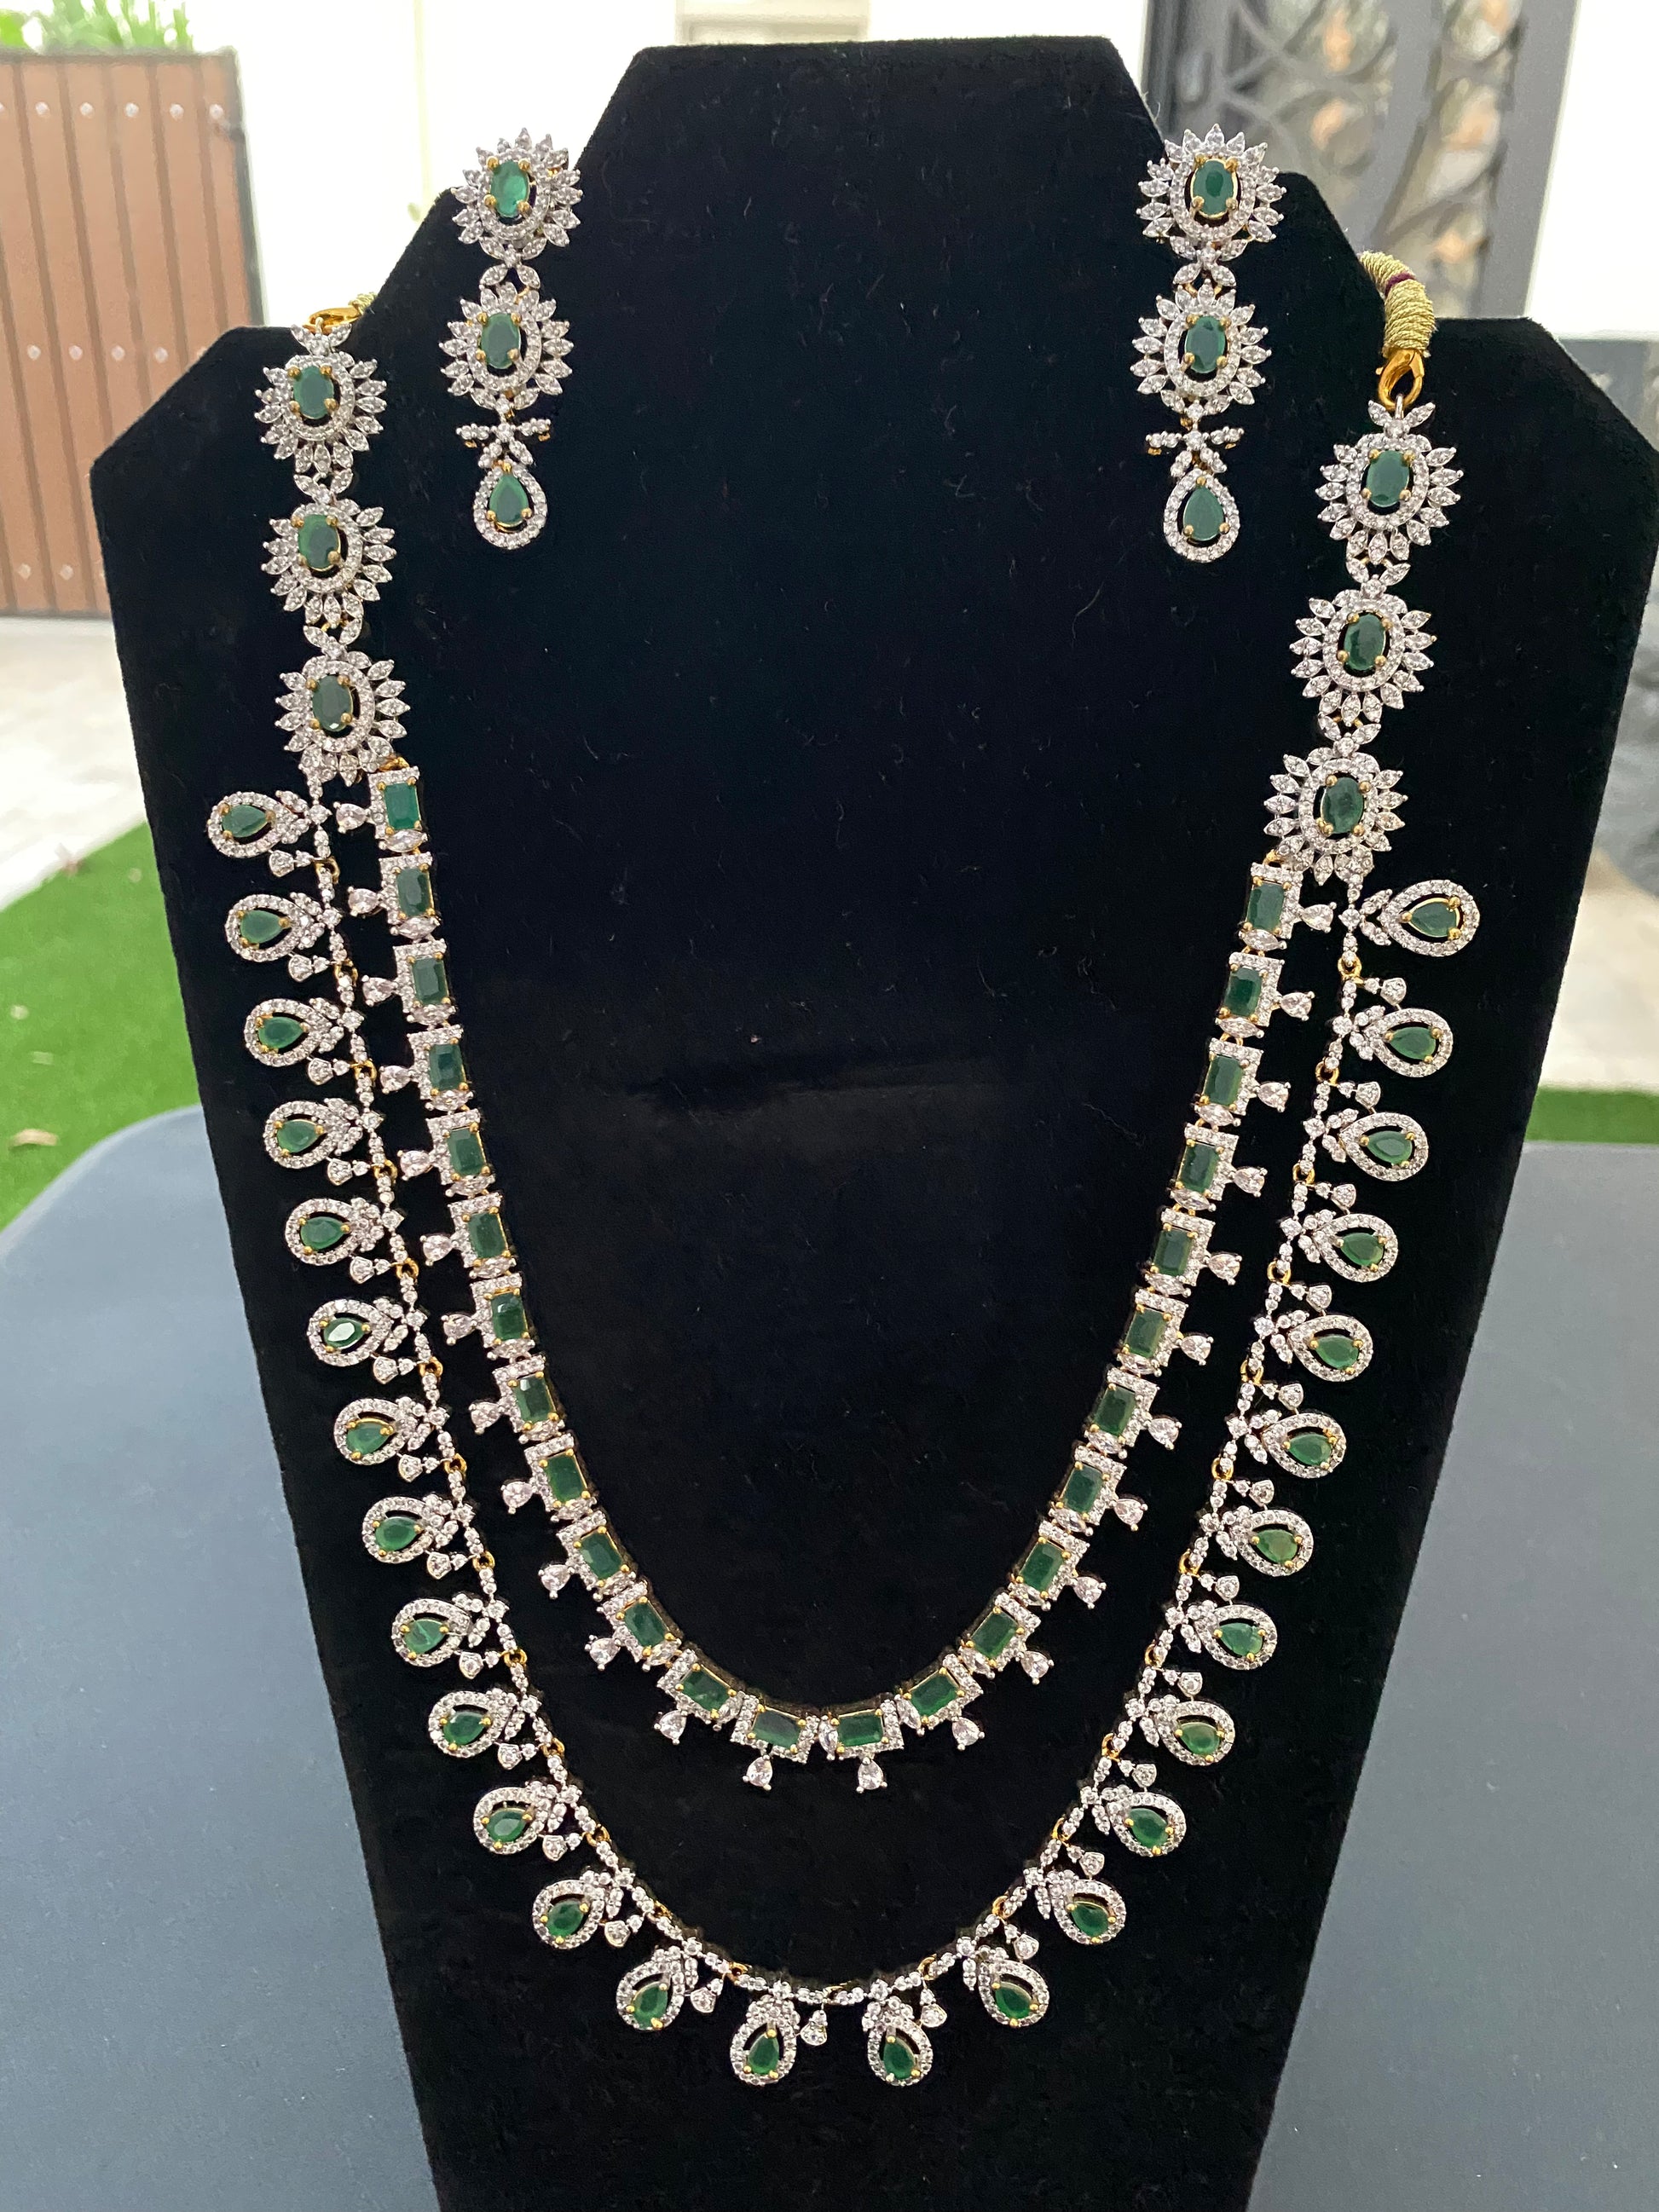  American Diamonds Necklace With Earrings in Chandler